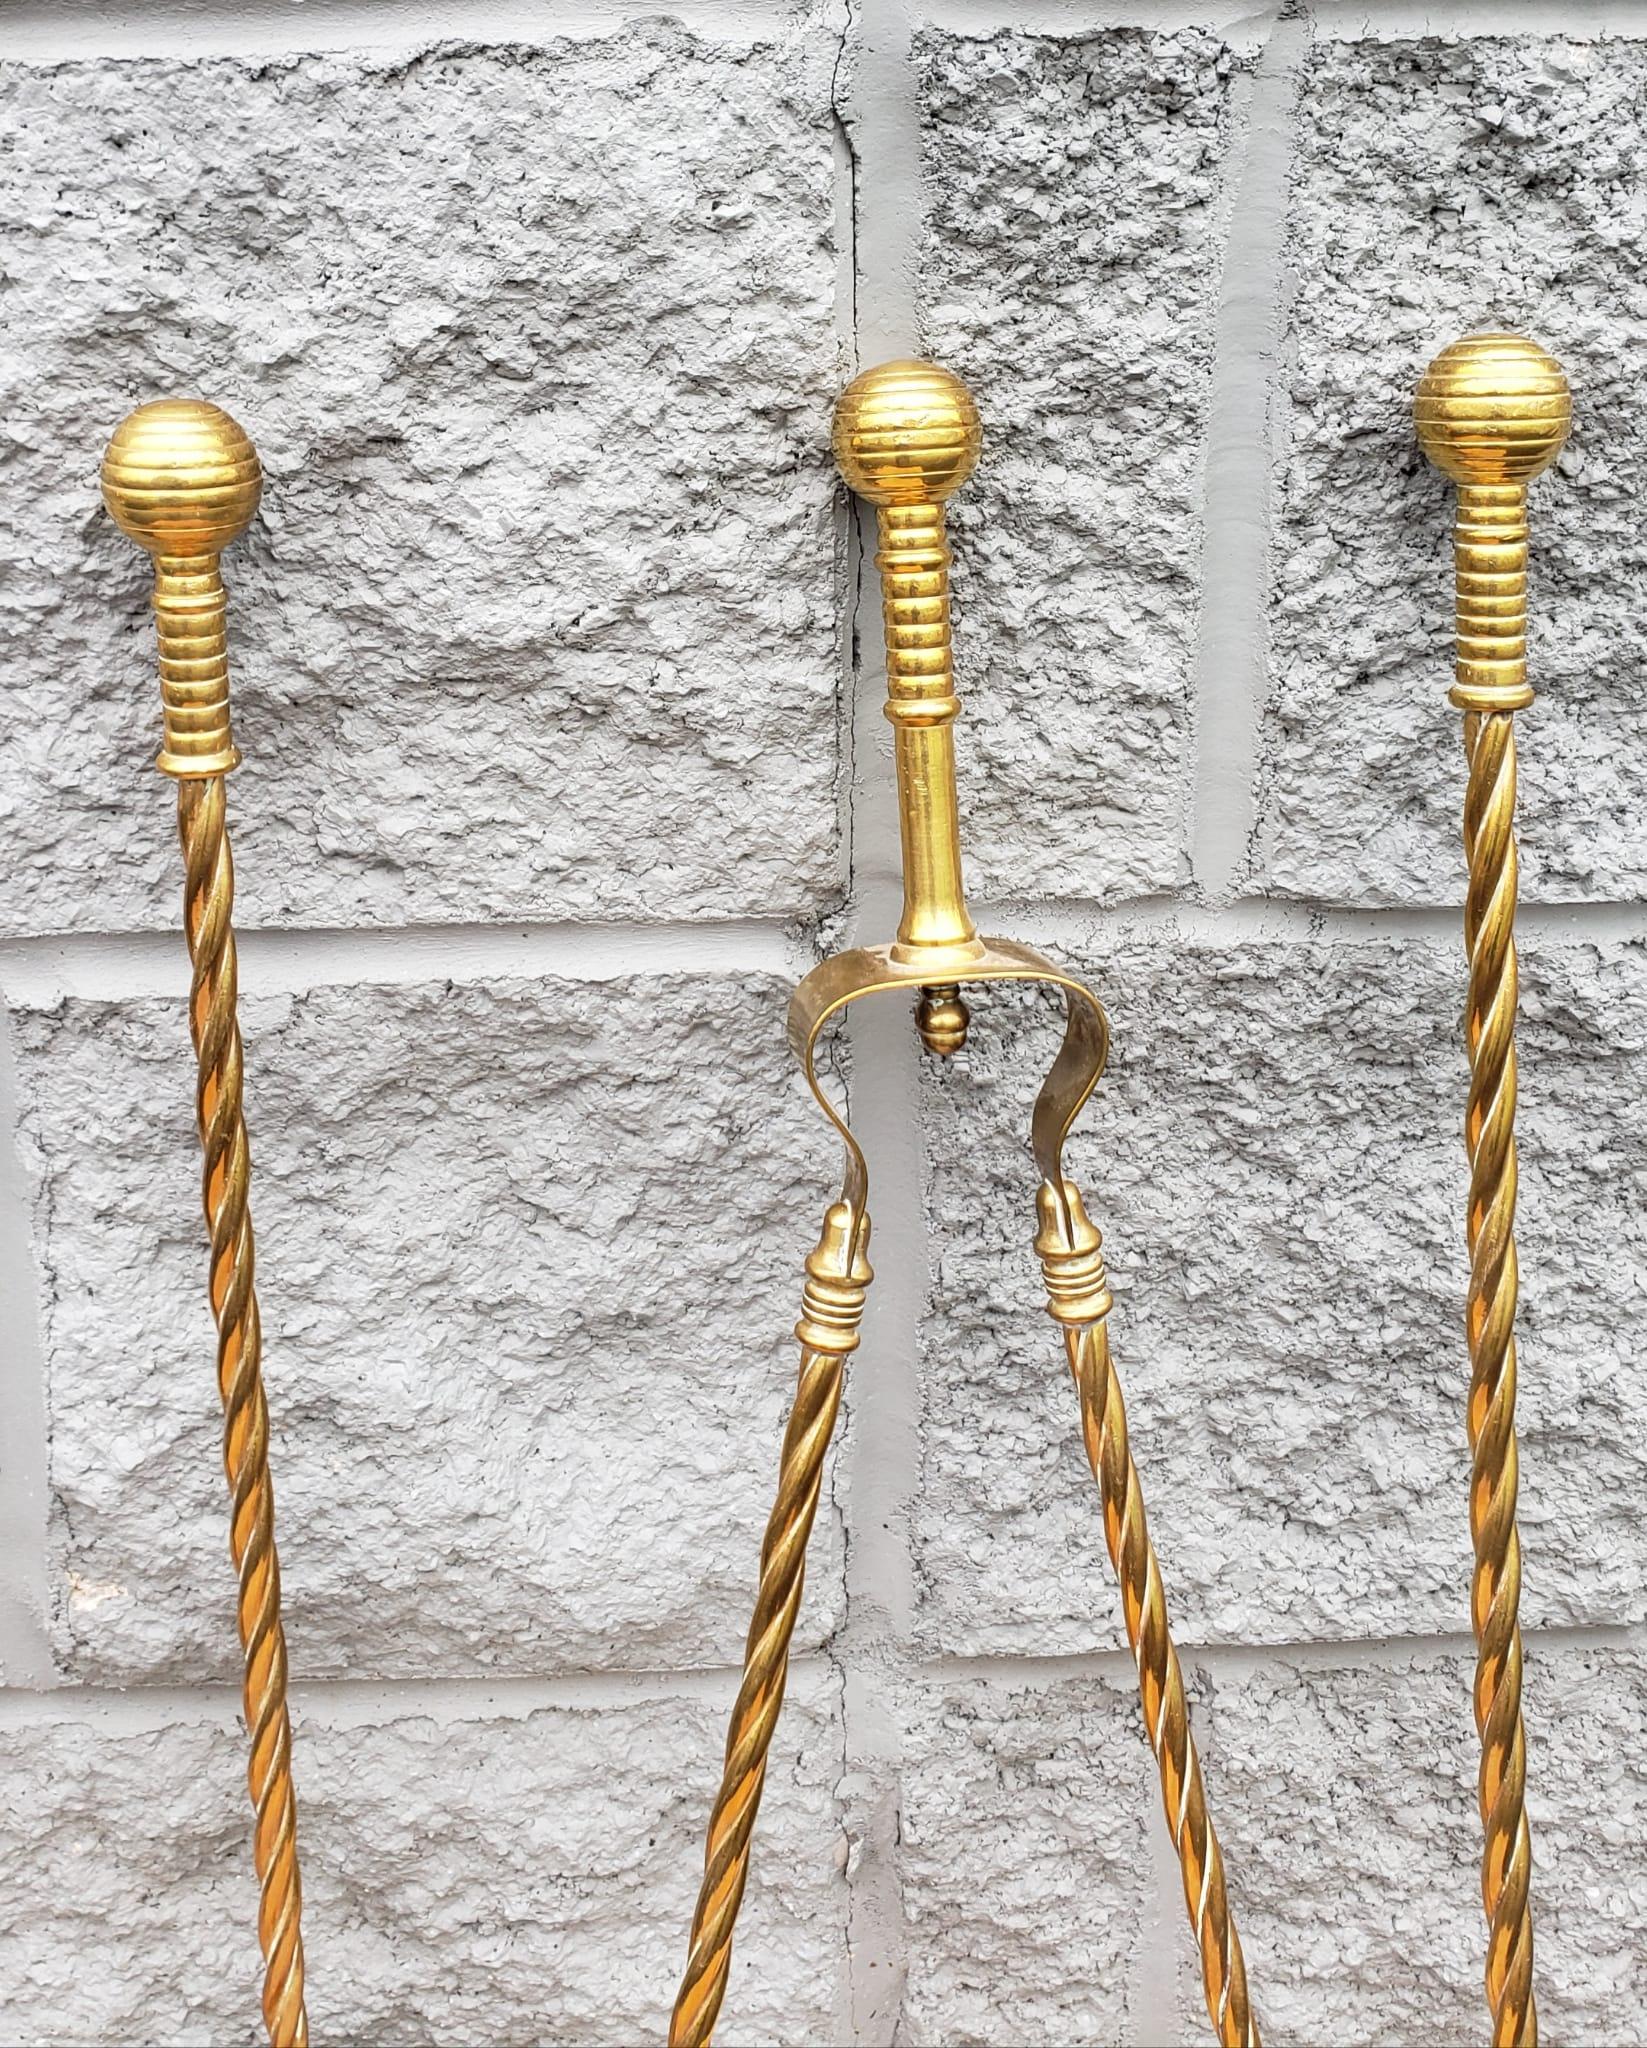 20th century set of 3 George III style cast and polished twisted rope brass tools set. A pair of tongs, a shovel and a poker. Reeled Ball finials and handles decorated. Very good vintage condition.